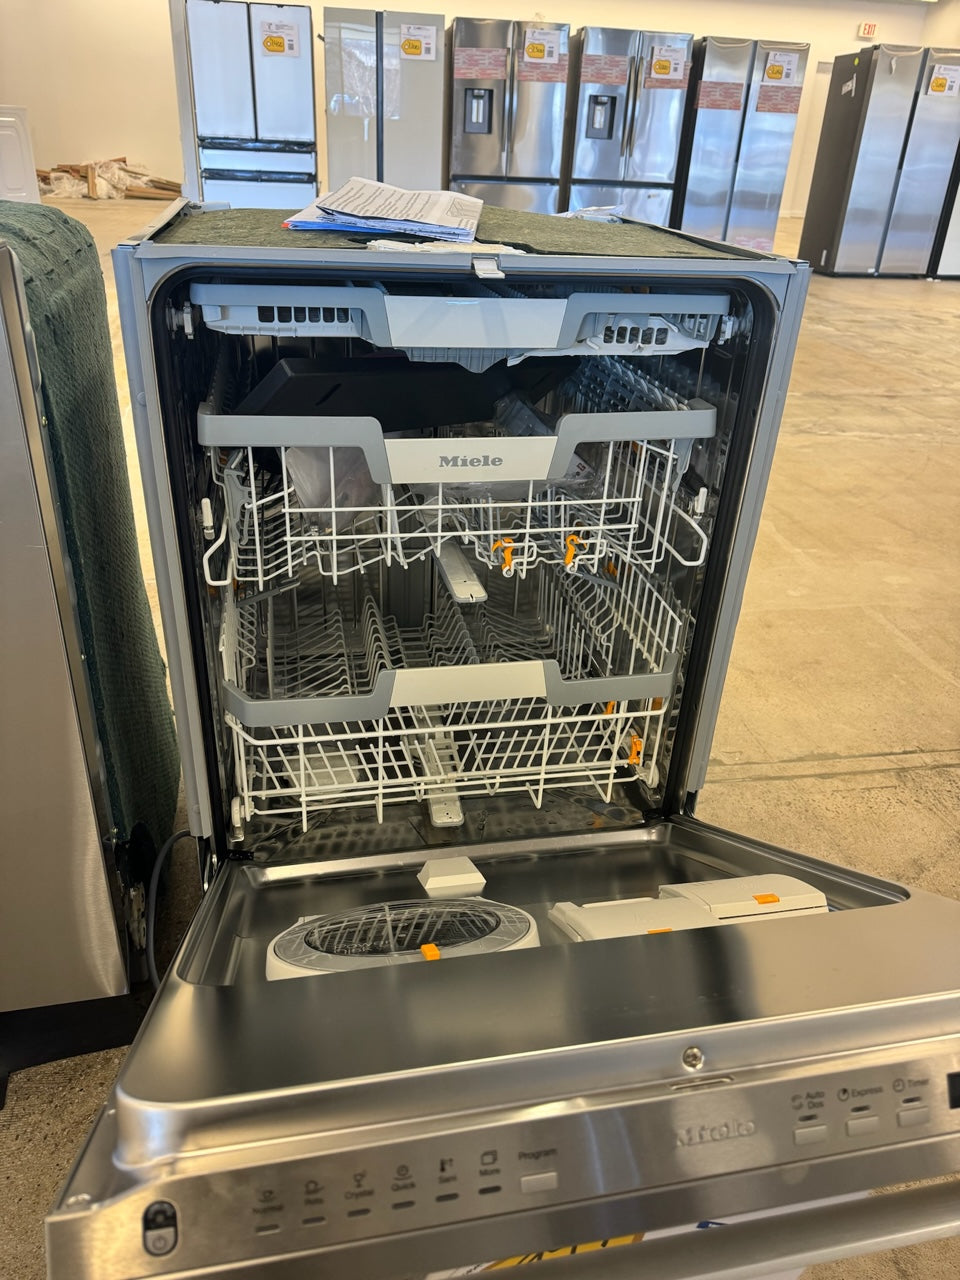 BRAND NEW MIELE TOP CONTROL DISHWASHER with THIRD RACK MODEL: G 7176 SCVI SF AD  DSW10005R